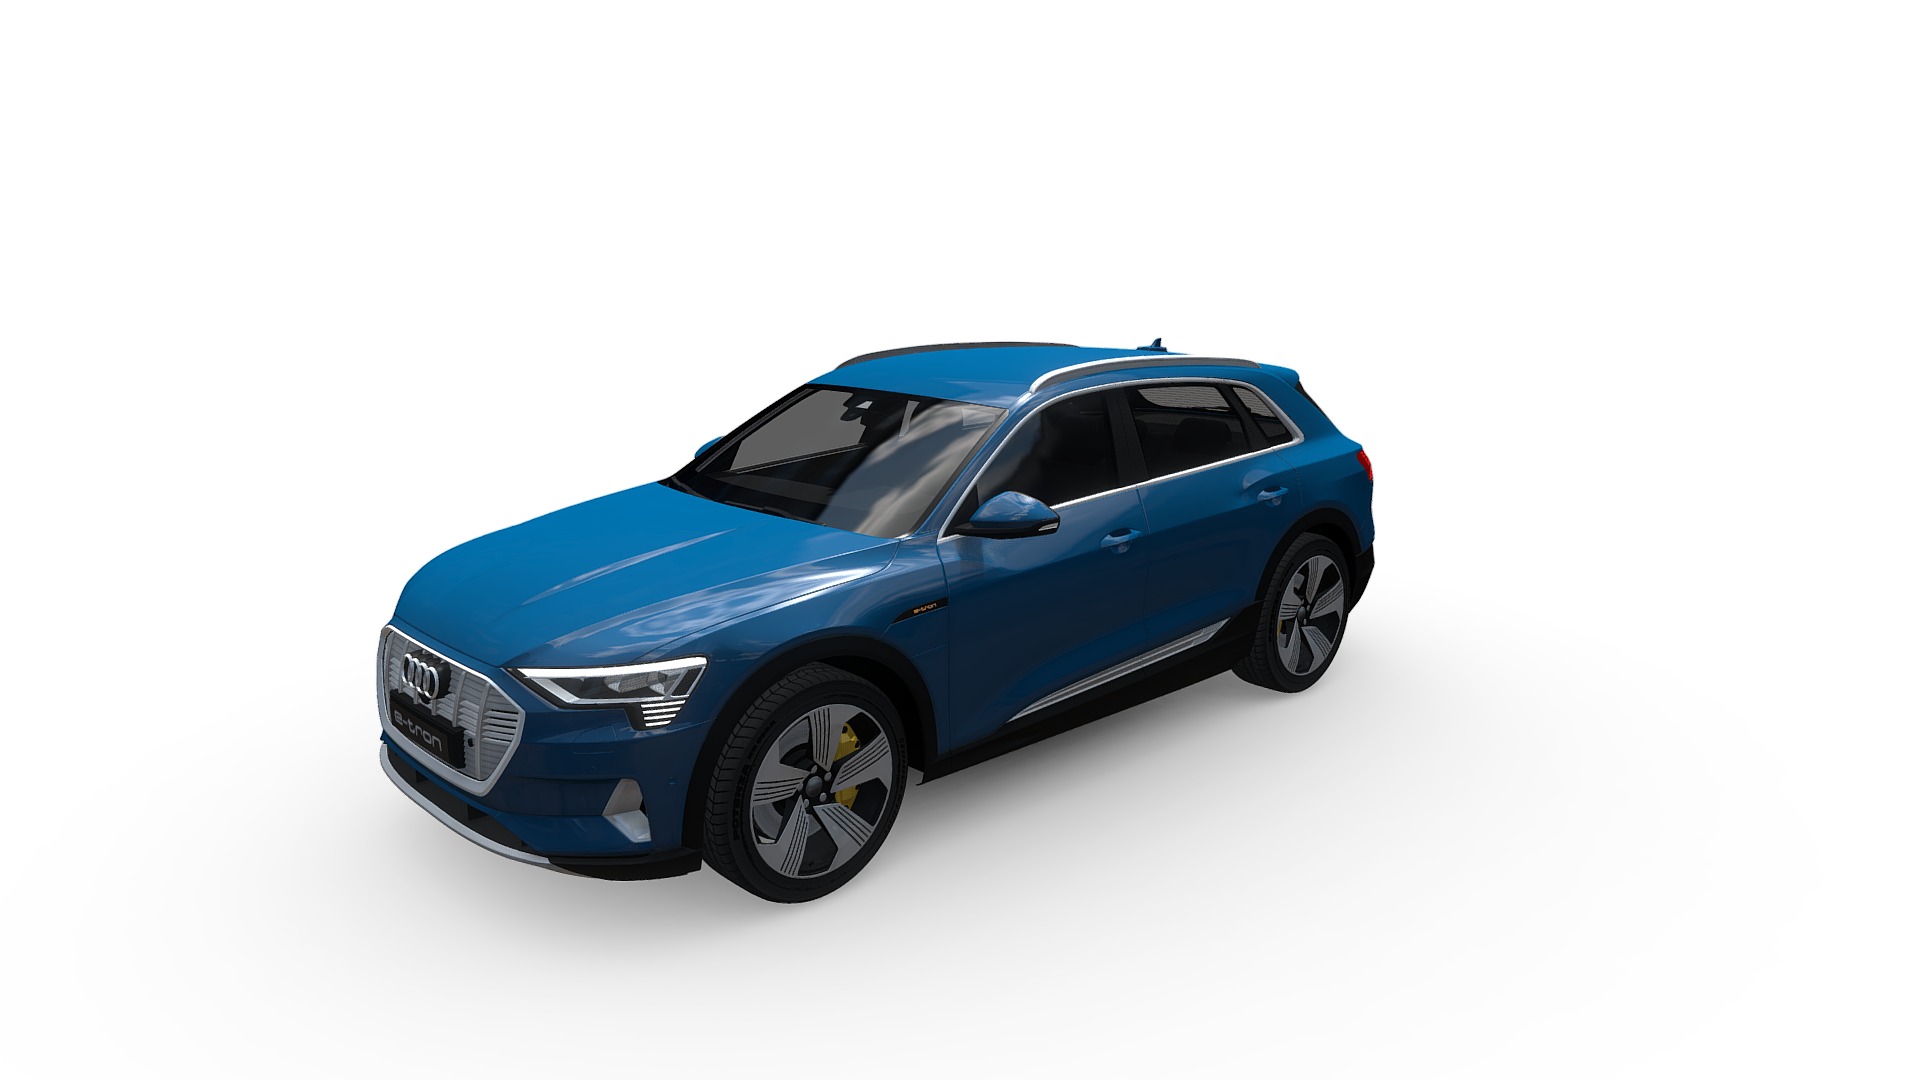 3D model Audi E-tron 2020 Regular Mirror - This is a 3D model of the Audi E-tron 2020 Regular Mirror. The 3D model is about a blue car with a white background.